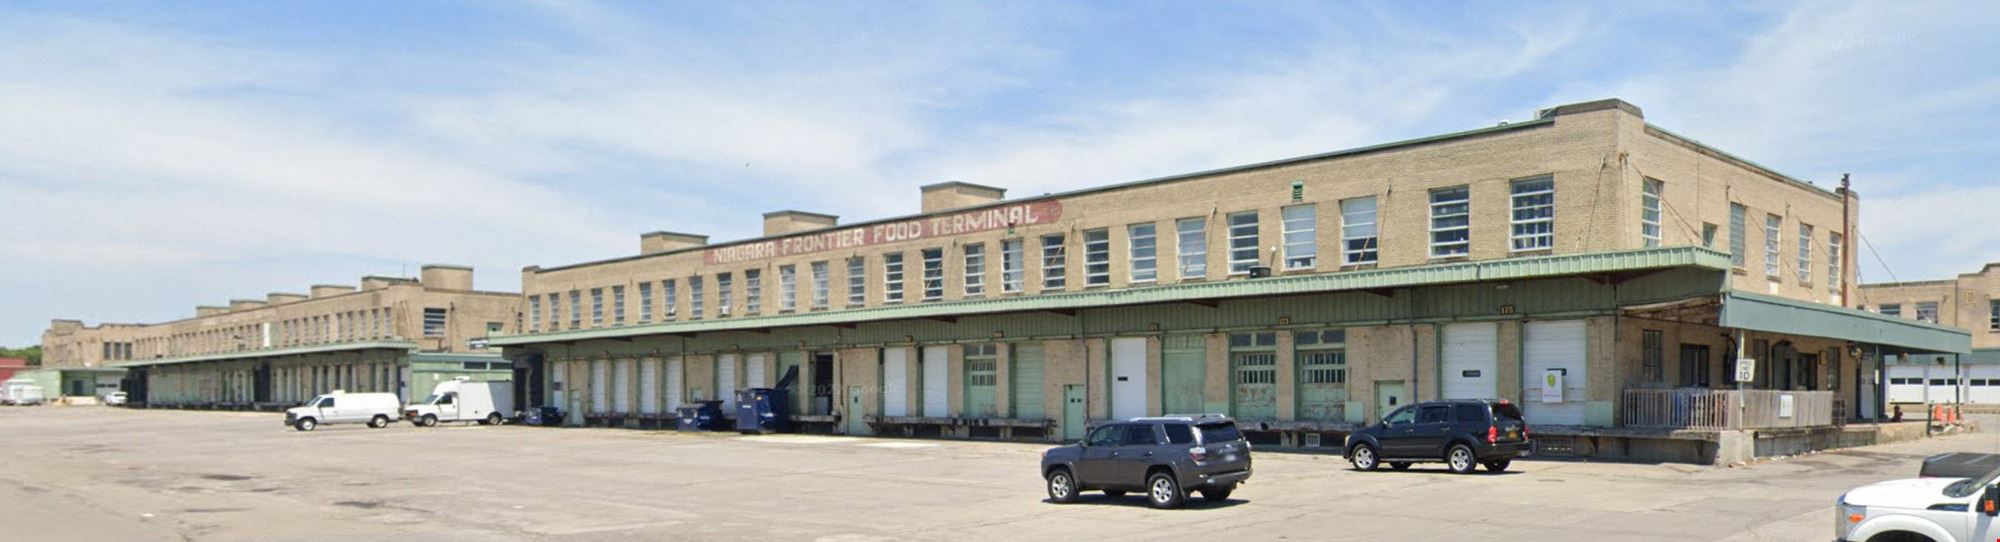 5 Retail/Warehouse Spaces available in the Niagara Frontier Food Terminal